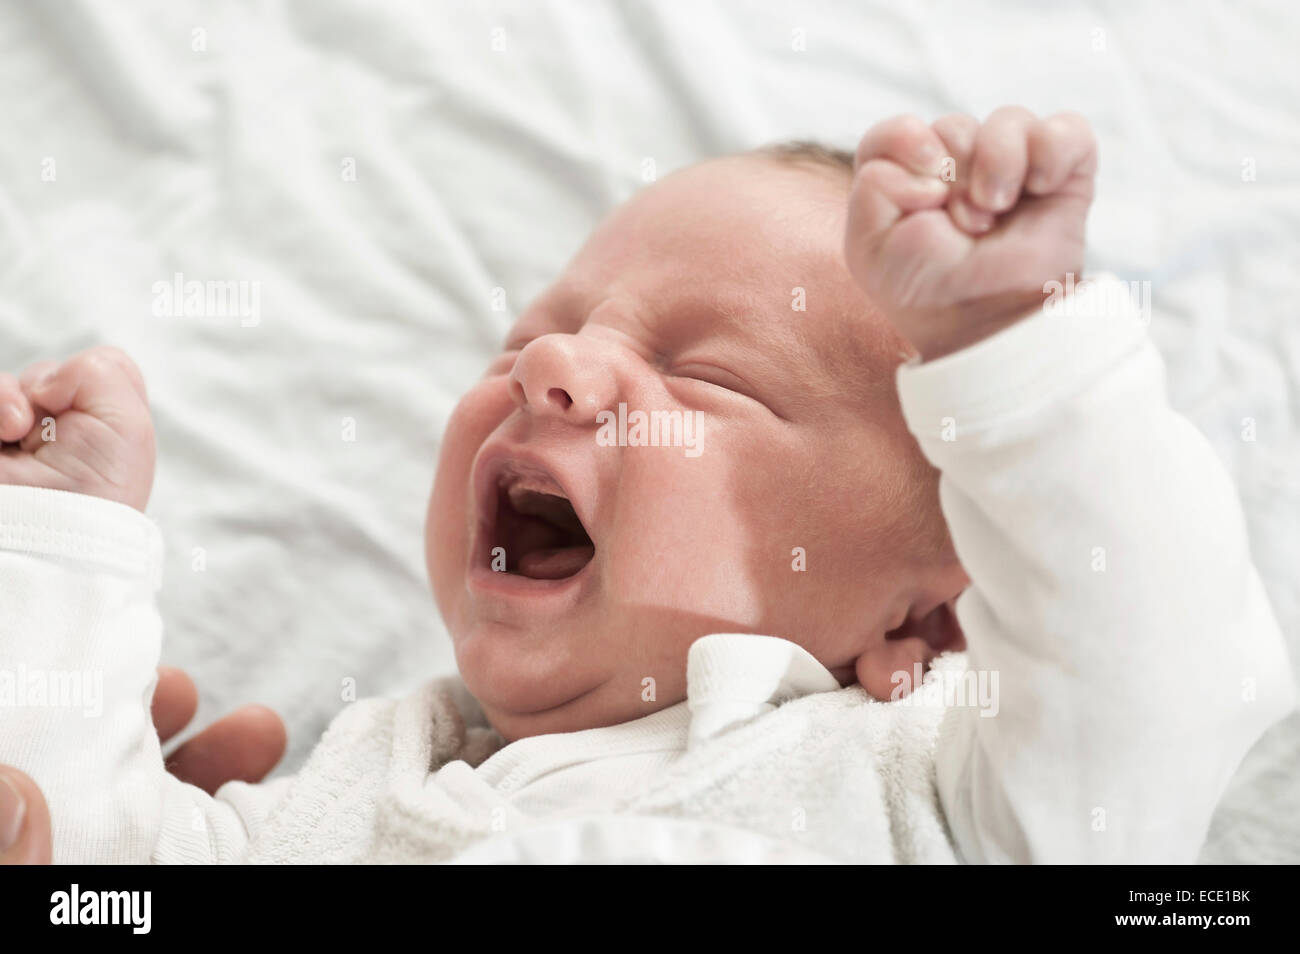 Small baby crying 2 weeks old screaming Stock Photo